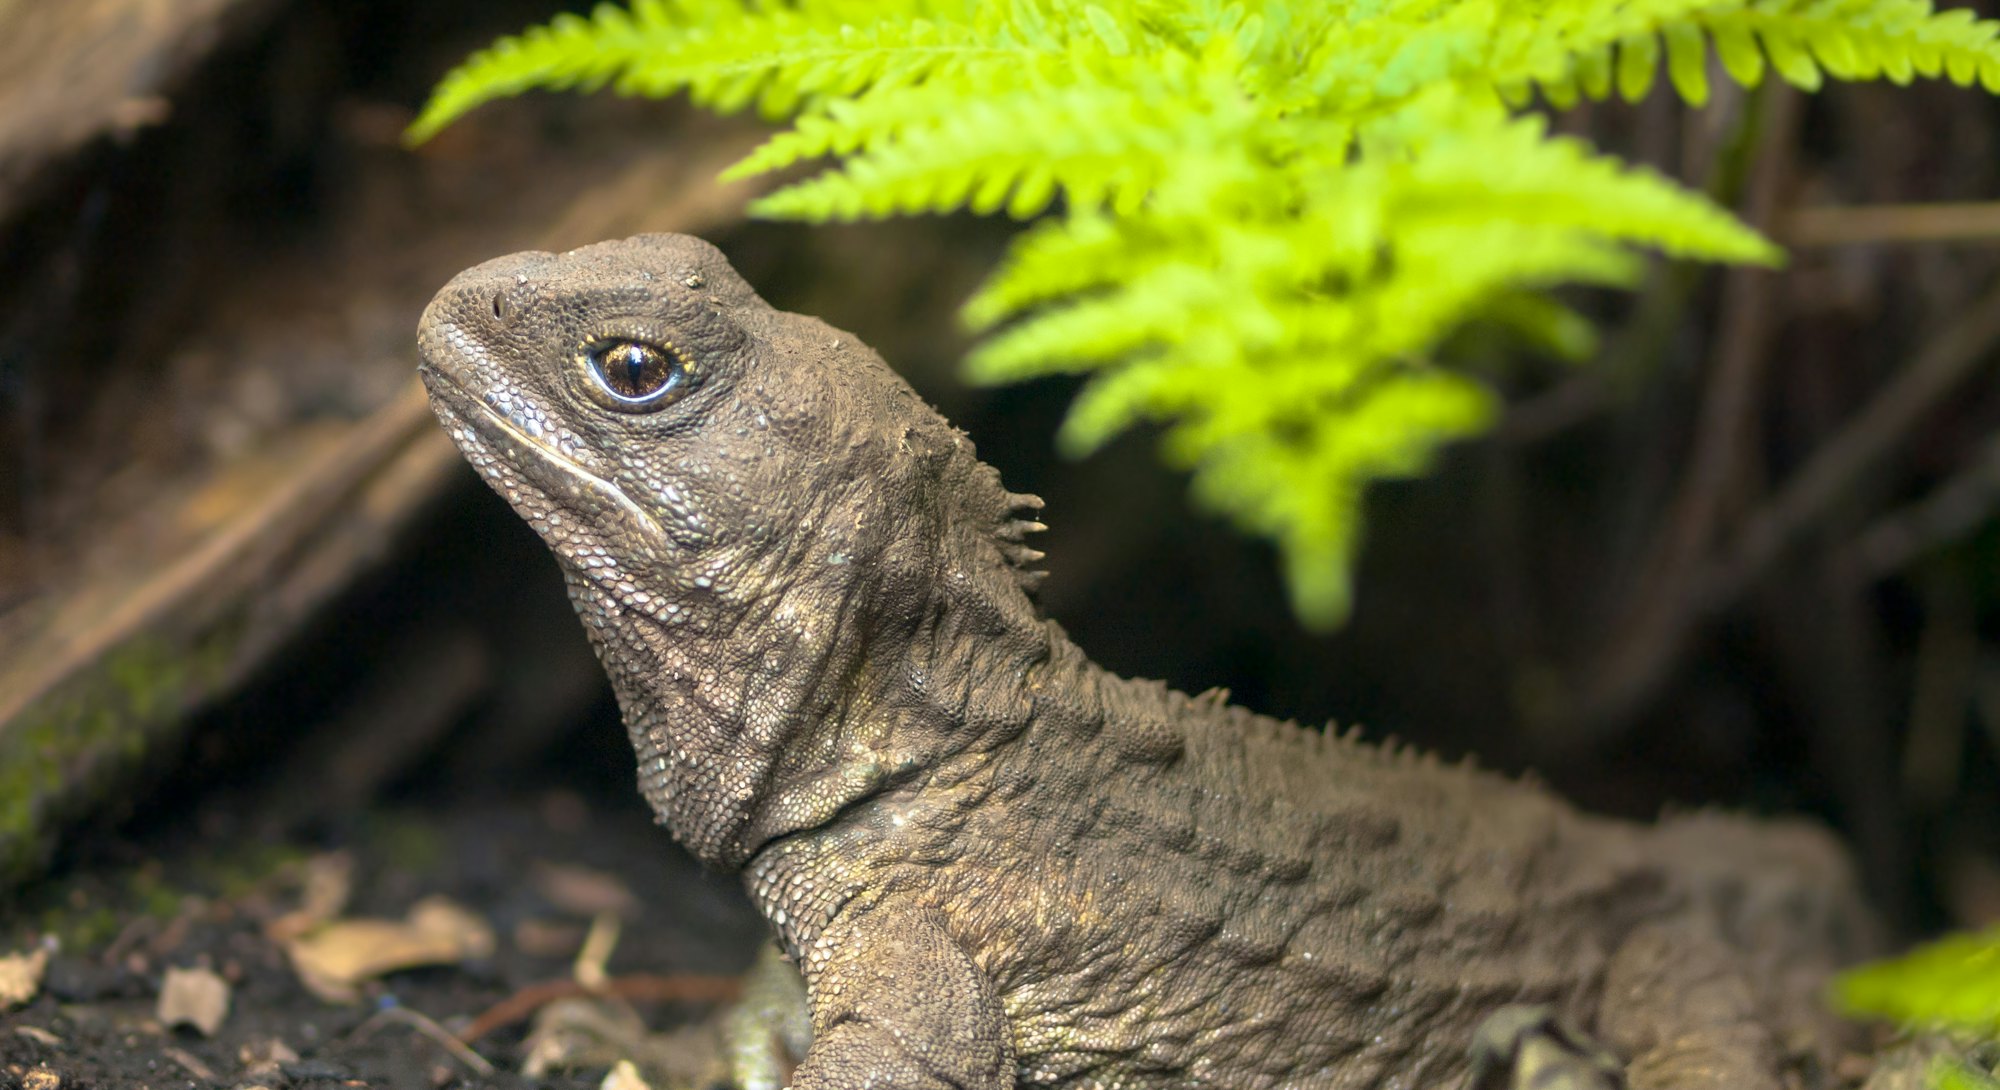 Tuatara, the living fossil, is a native and endemic reptile in new zealand. Animal in natural enviro...